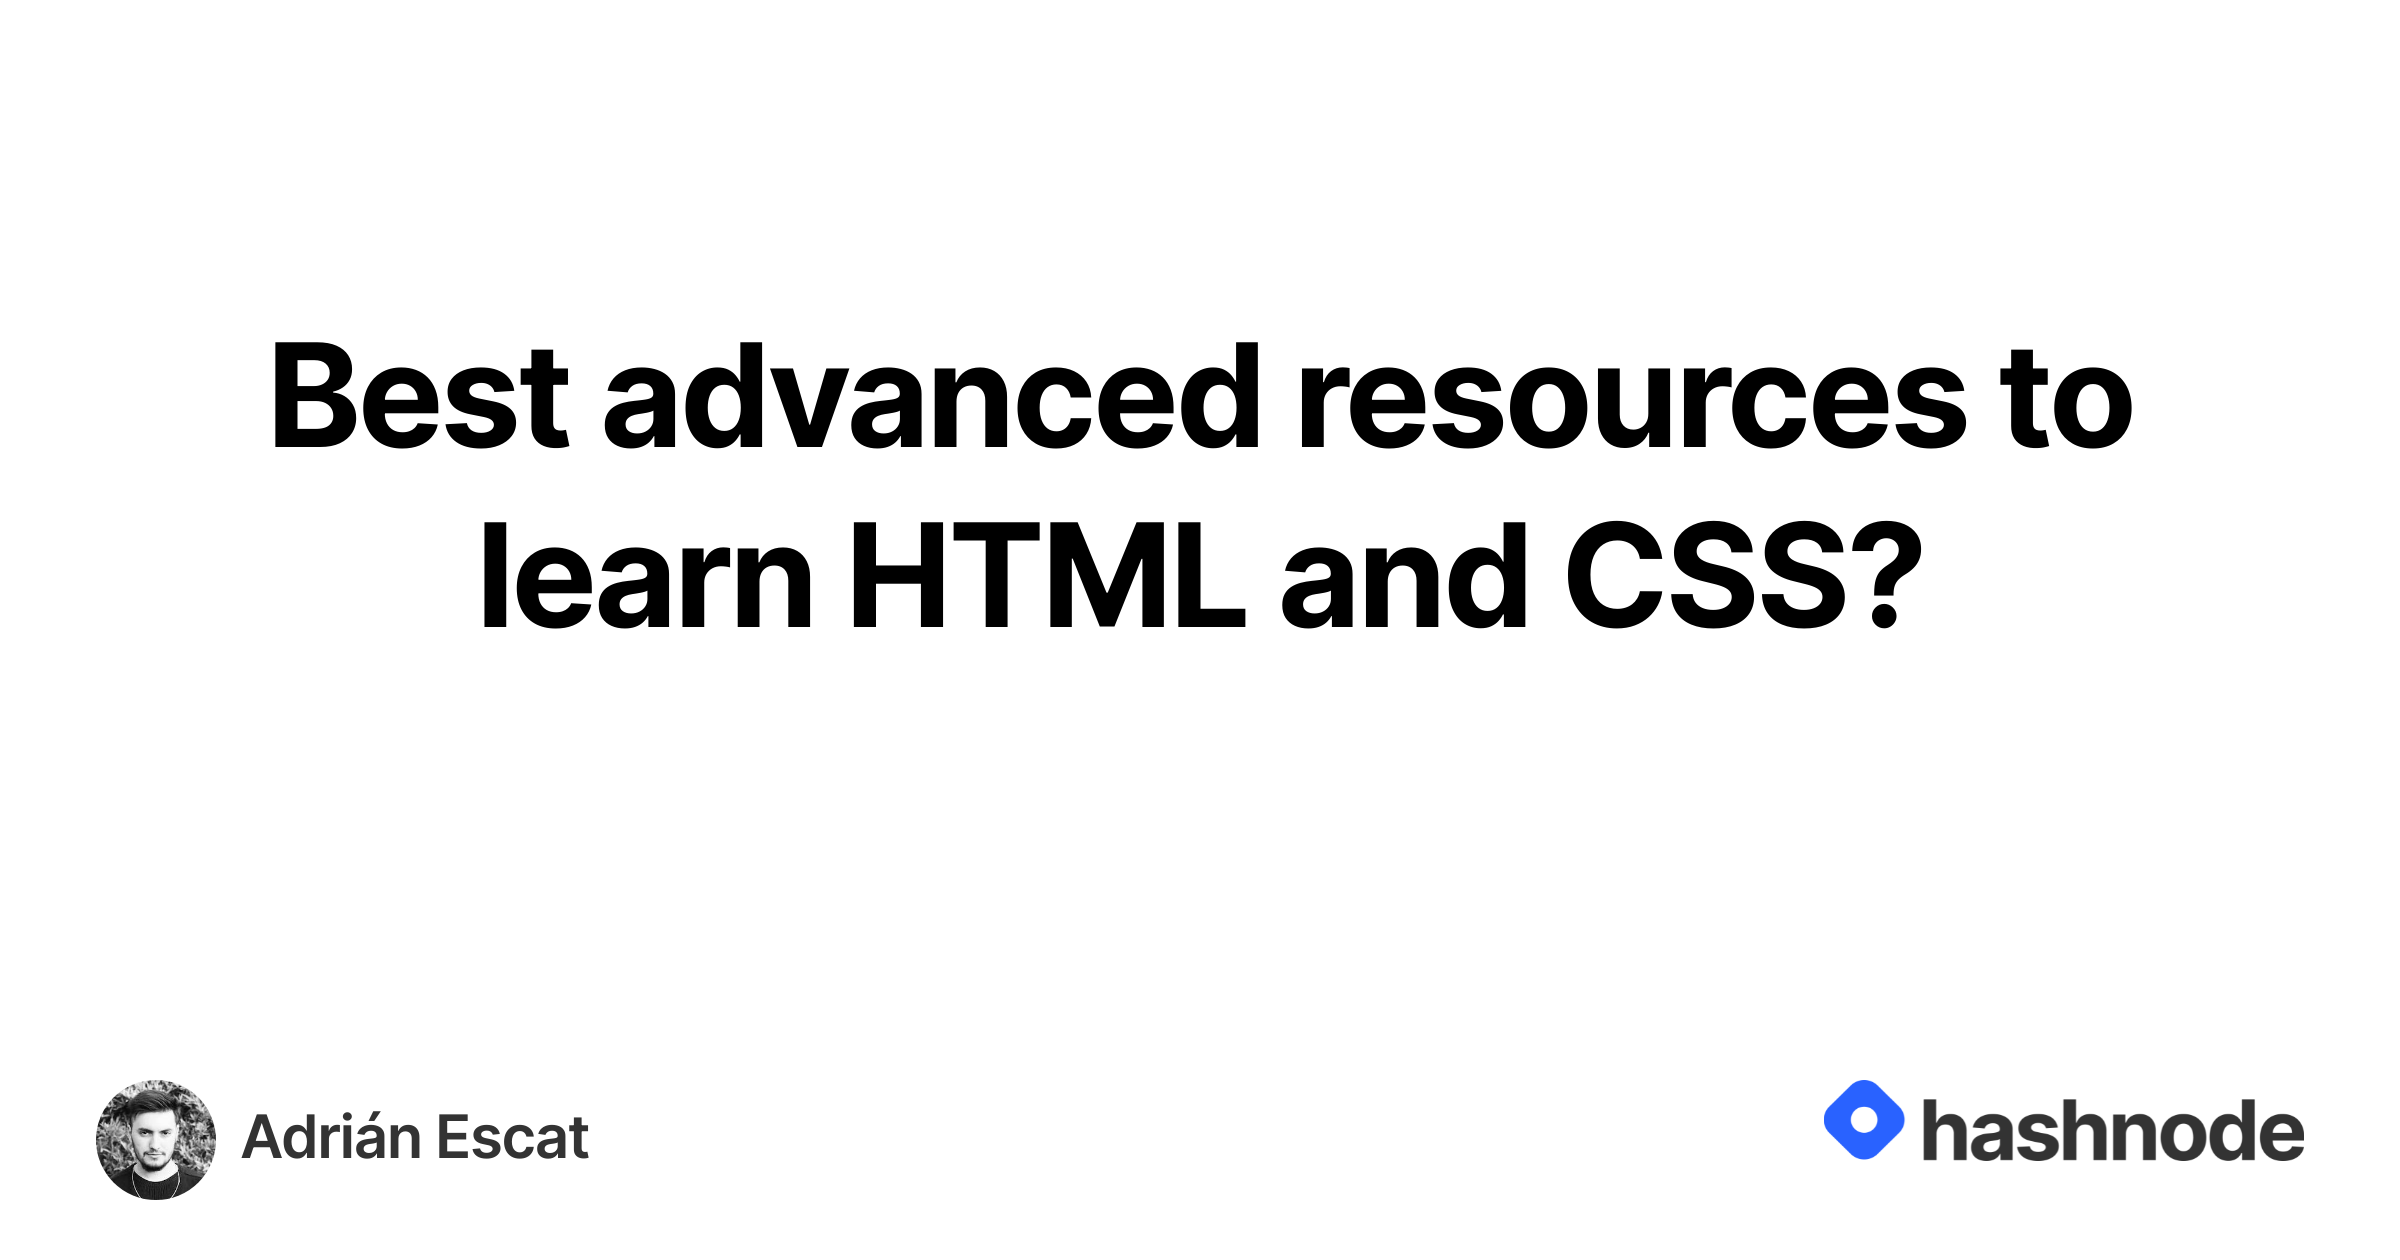 best-advanced-resources-to-learn-html-and-css-hashnode